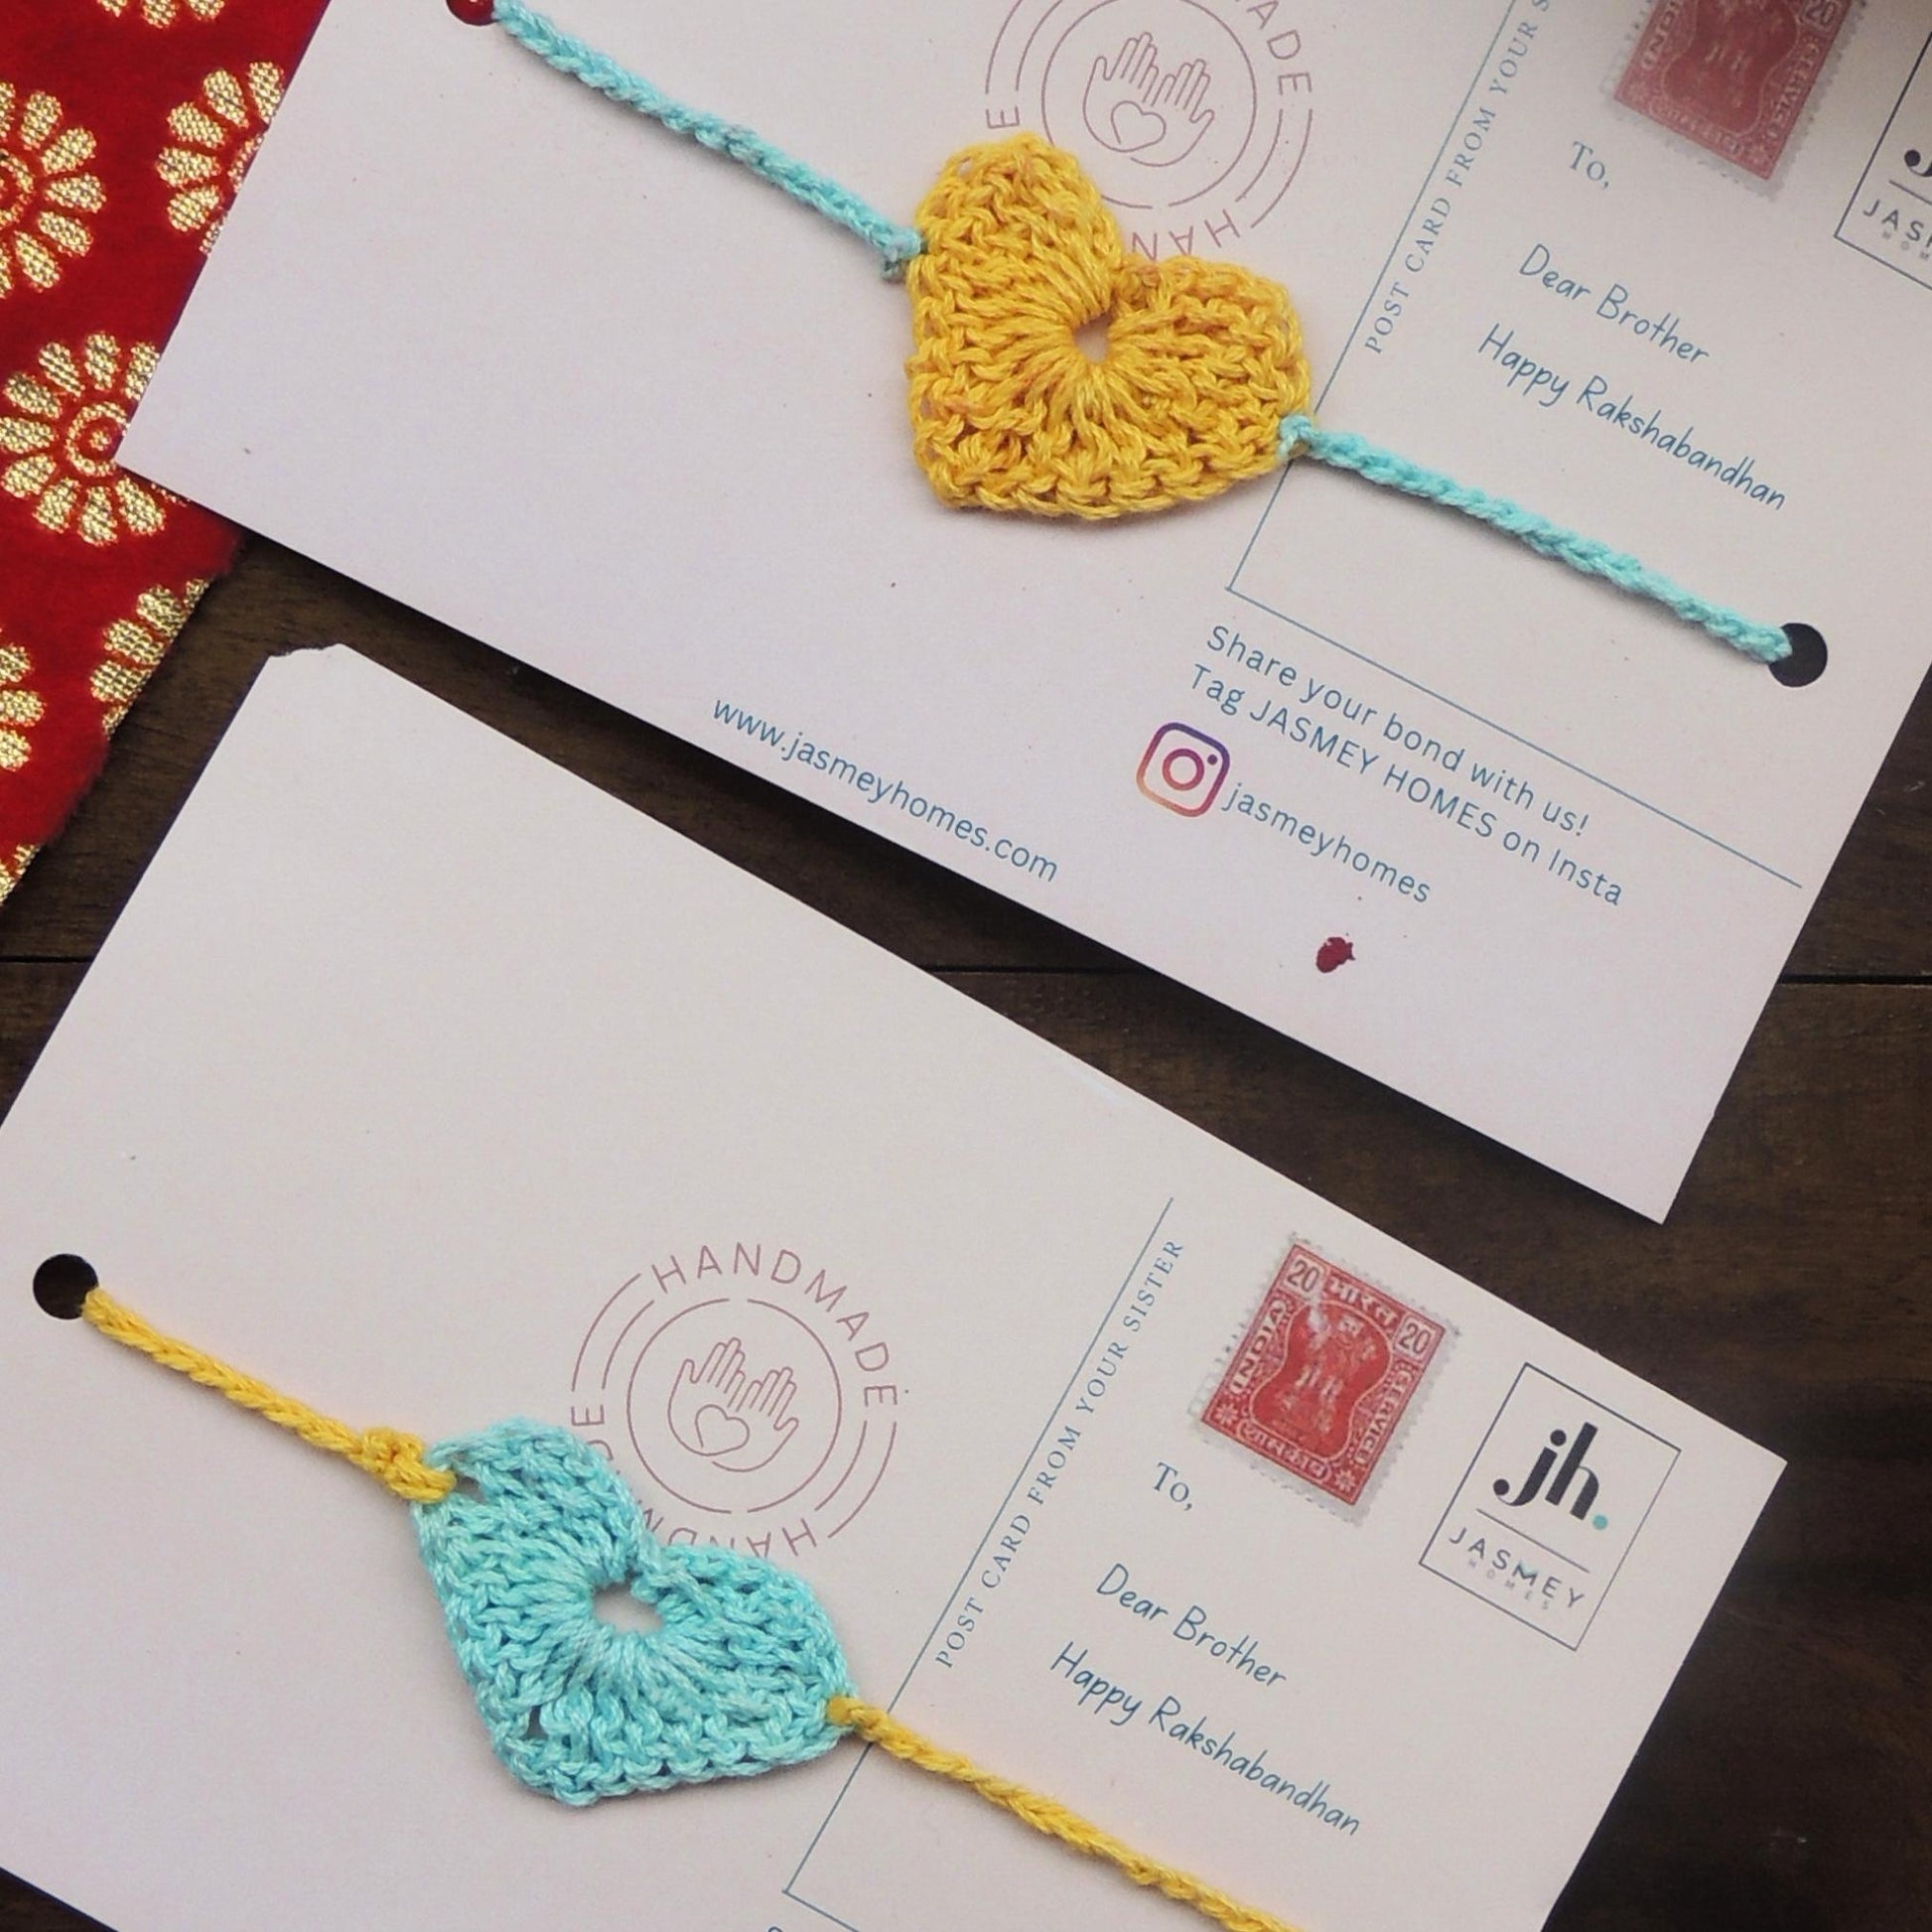 Set of 4 HEART Rakhi for Brother with Postcard - jasmeyhomes